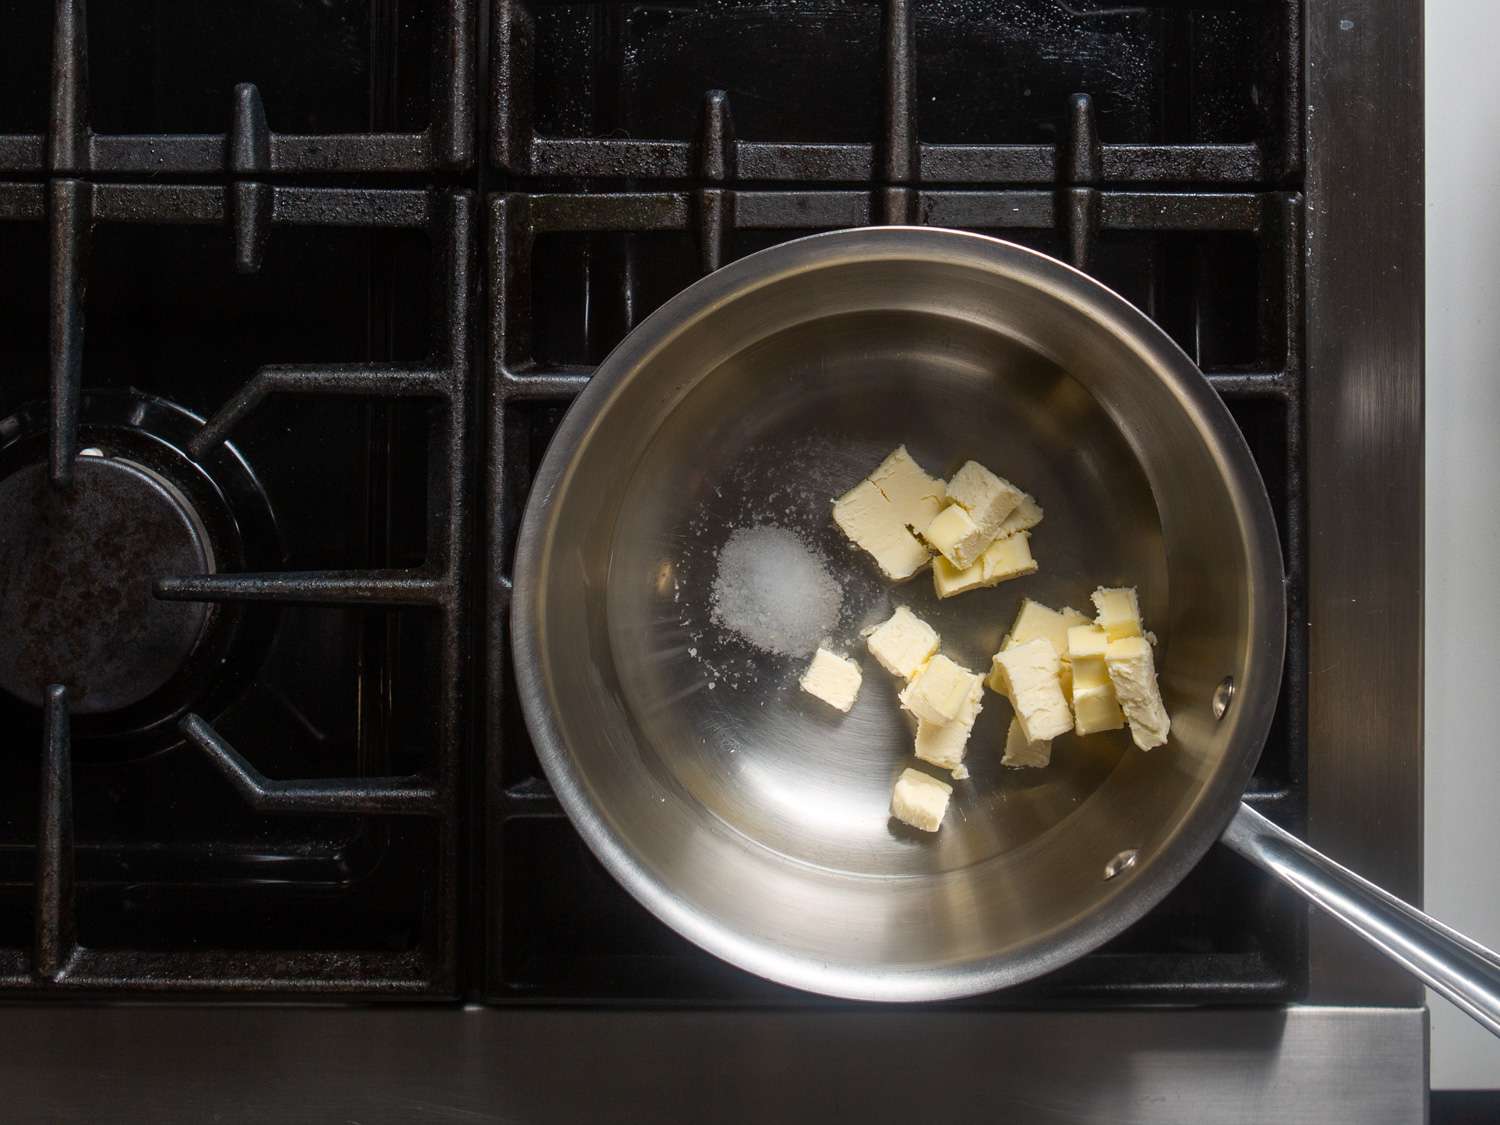 Overhead view of a saucier with the cubed butter, water, and salt, ready to heat.